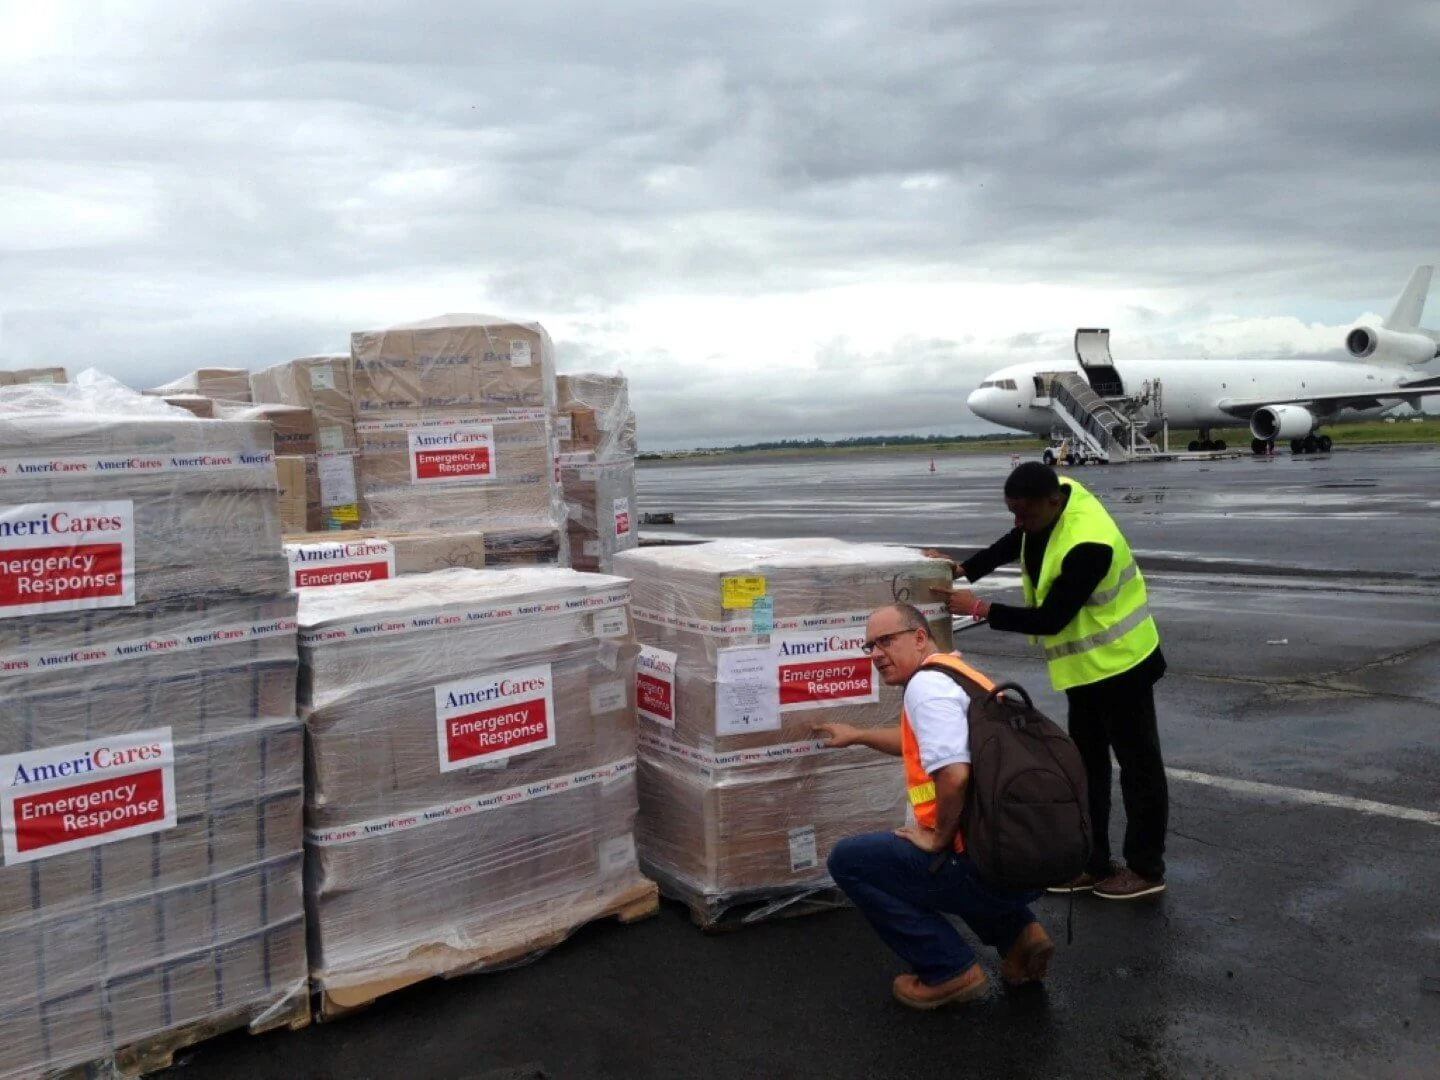 Americares supplies on shrink-wrapped pallets being checked by two workers on the tarmac with a supply plane in the background.